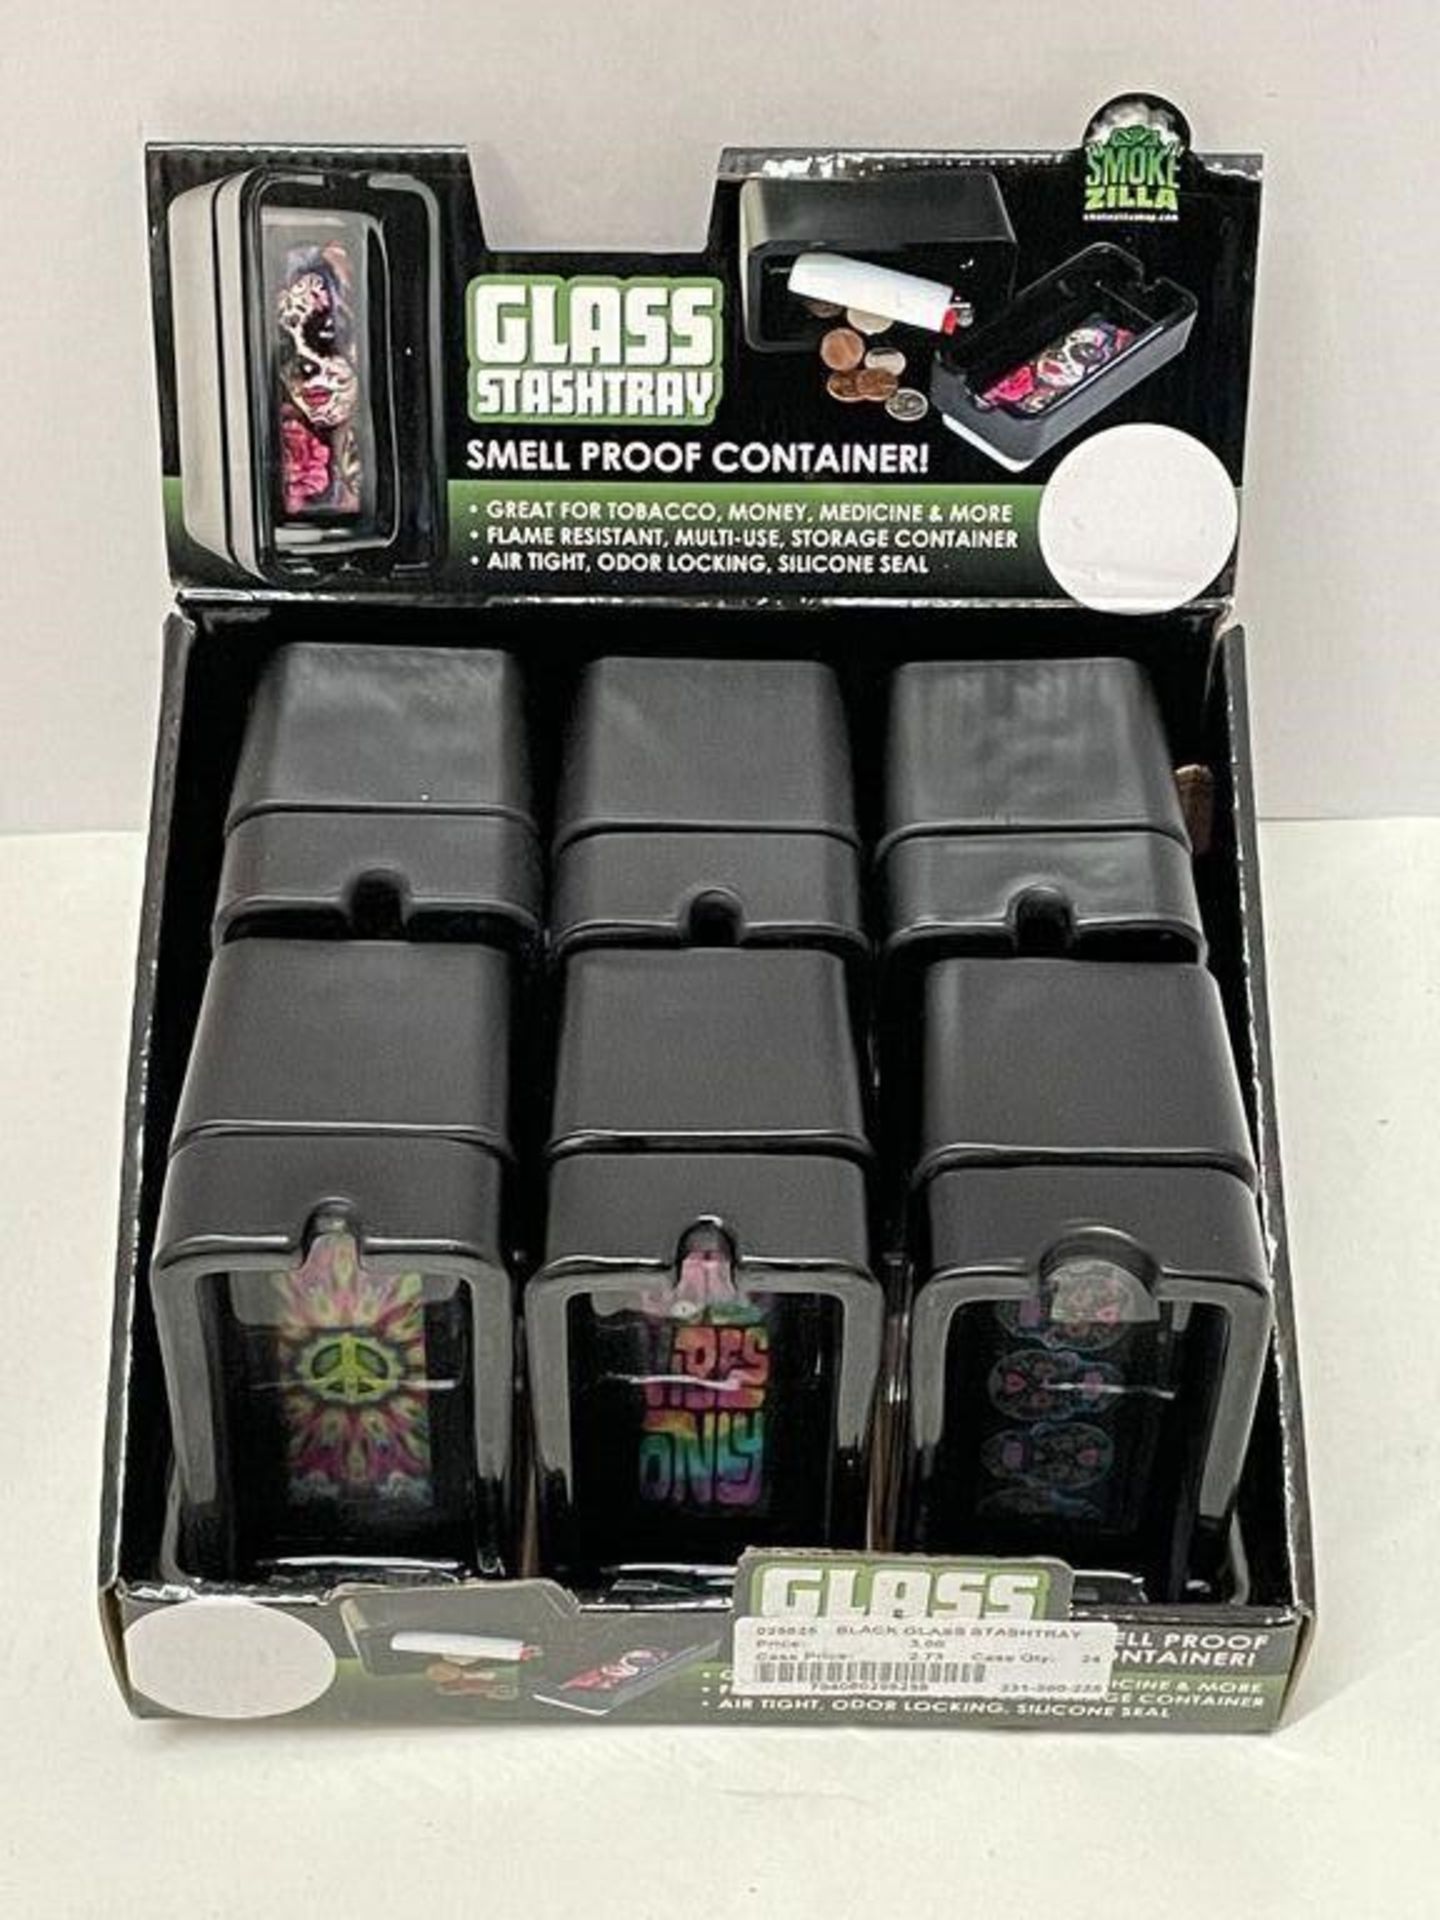 6 X GLASS STASHTRAY ASHTRAYS, SMELL PROOF CONTAINER, IN BLACK WITH VARIOUS DESIGNS, IN DISPLAY CASE